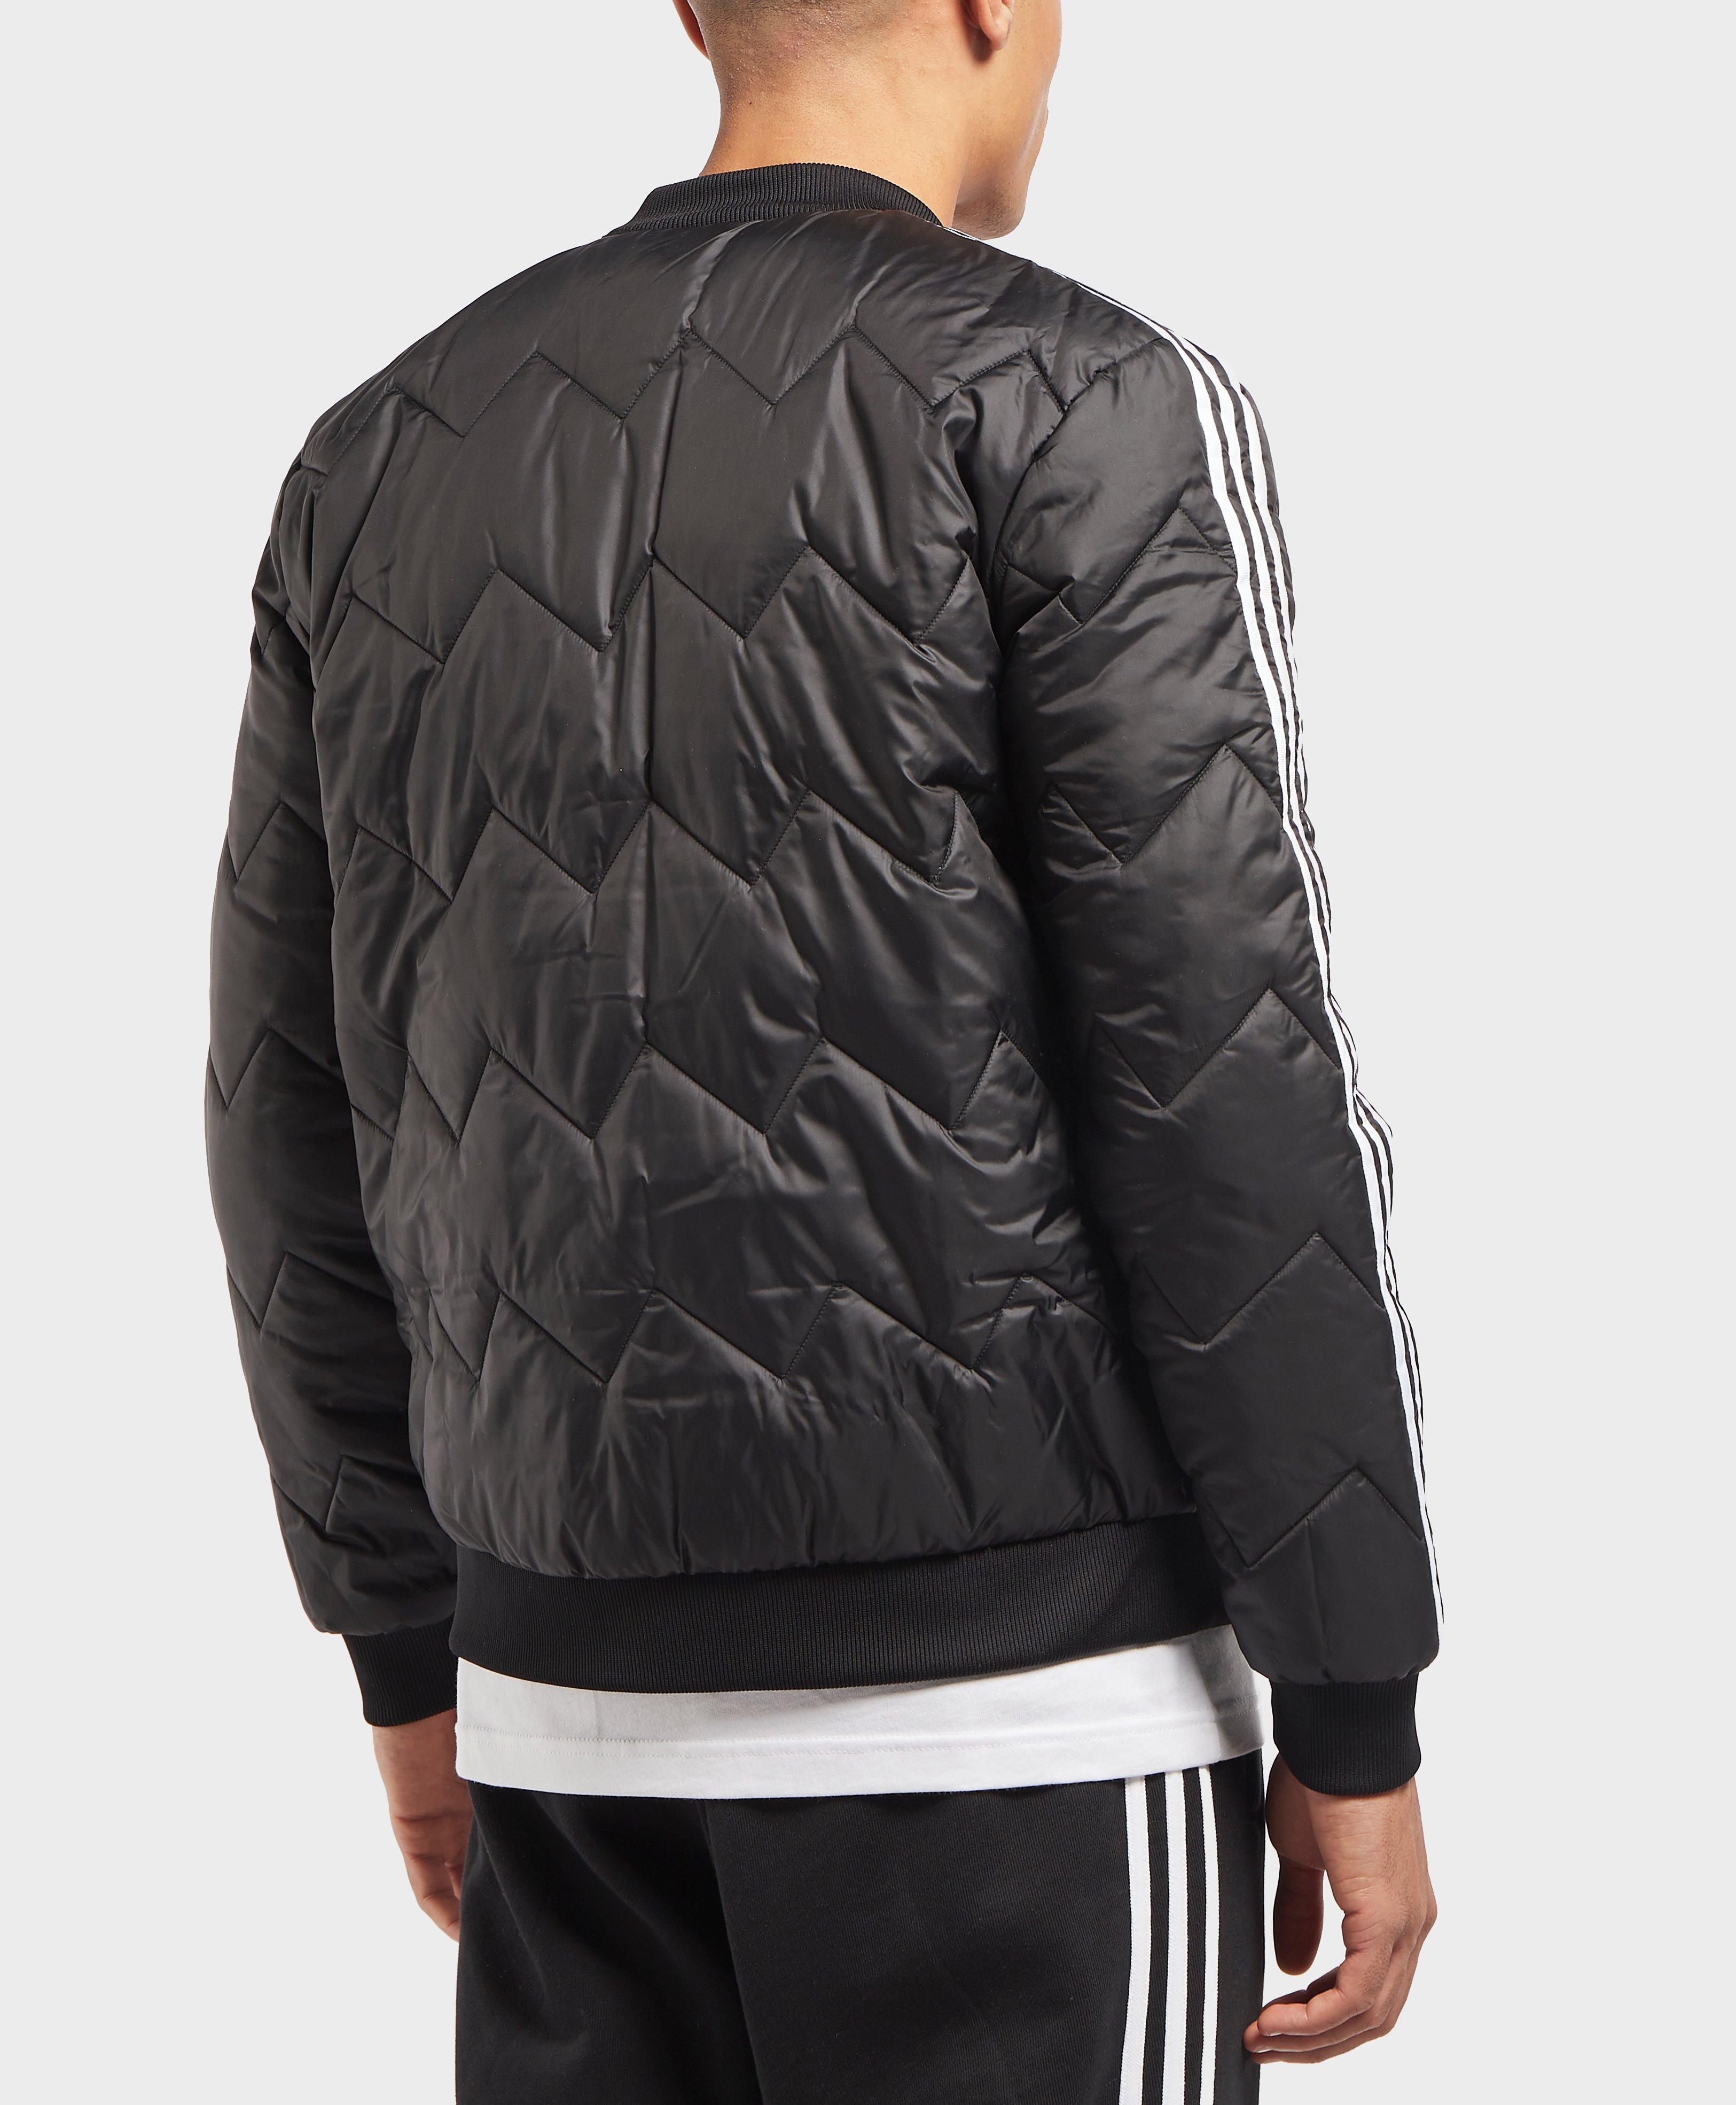 adidas men's sst quilted bomber jacket